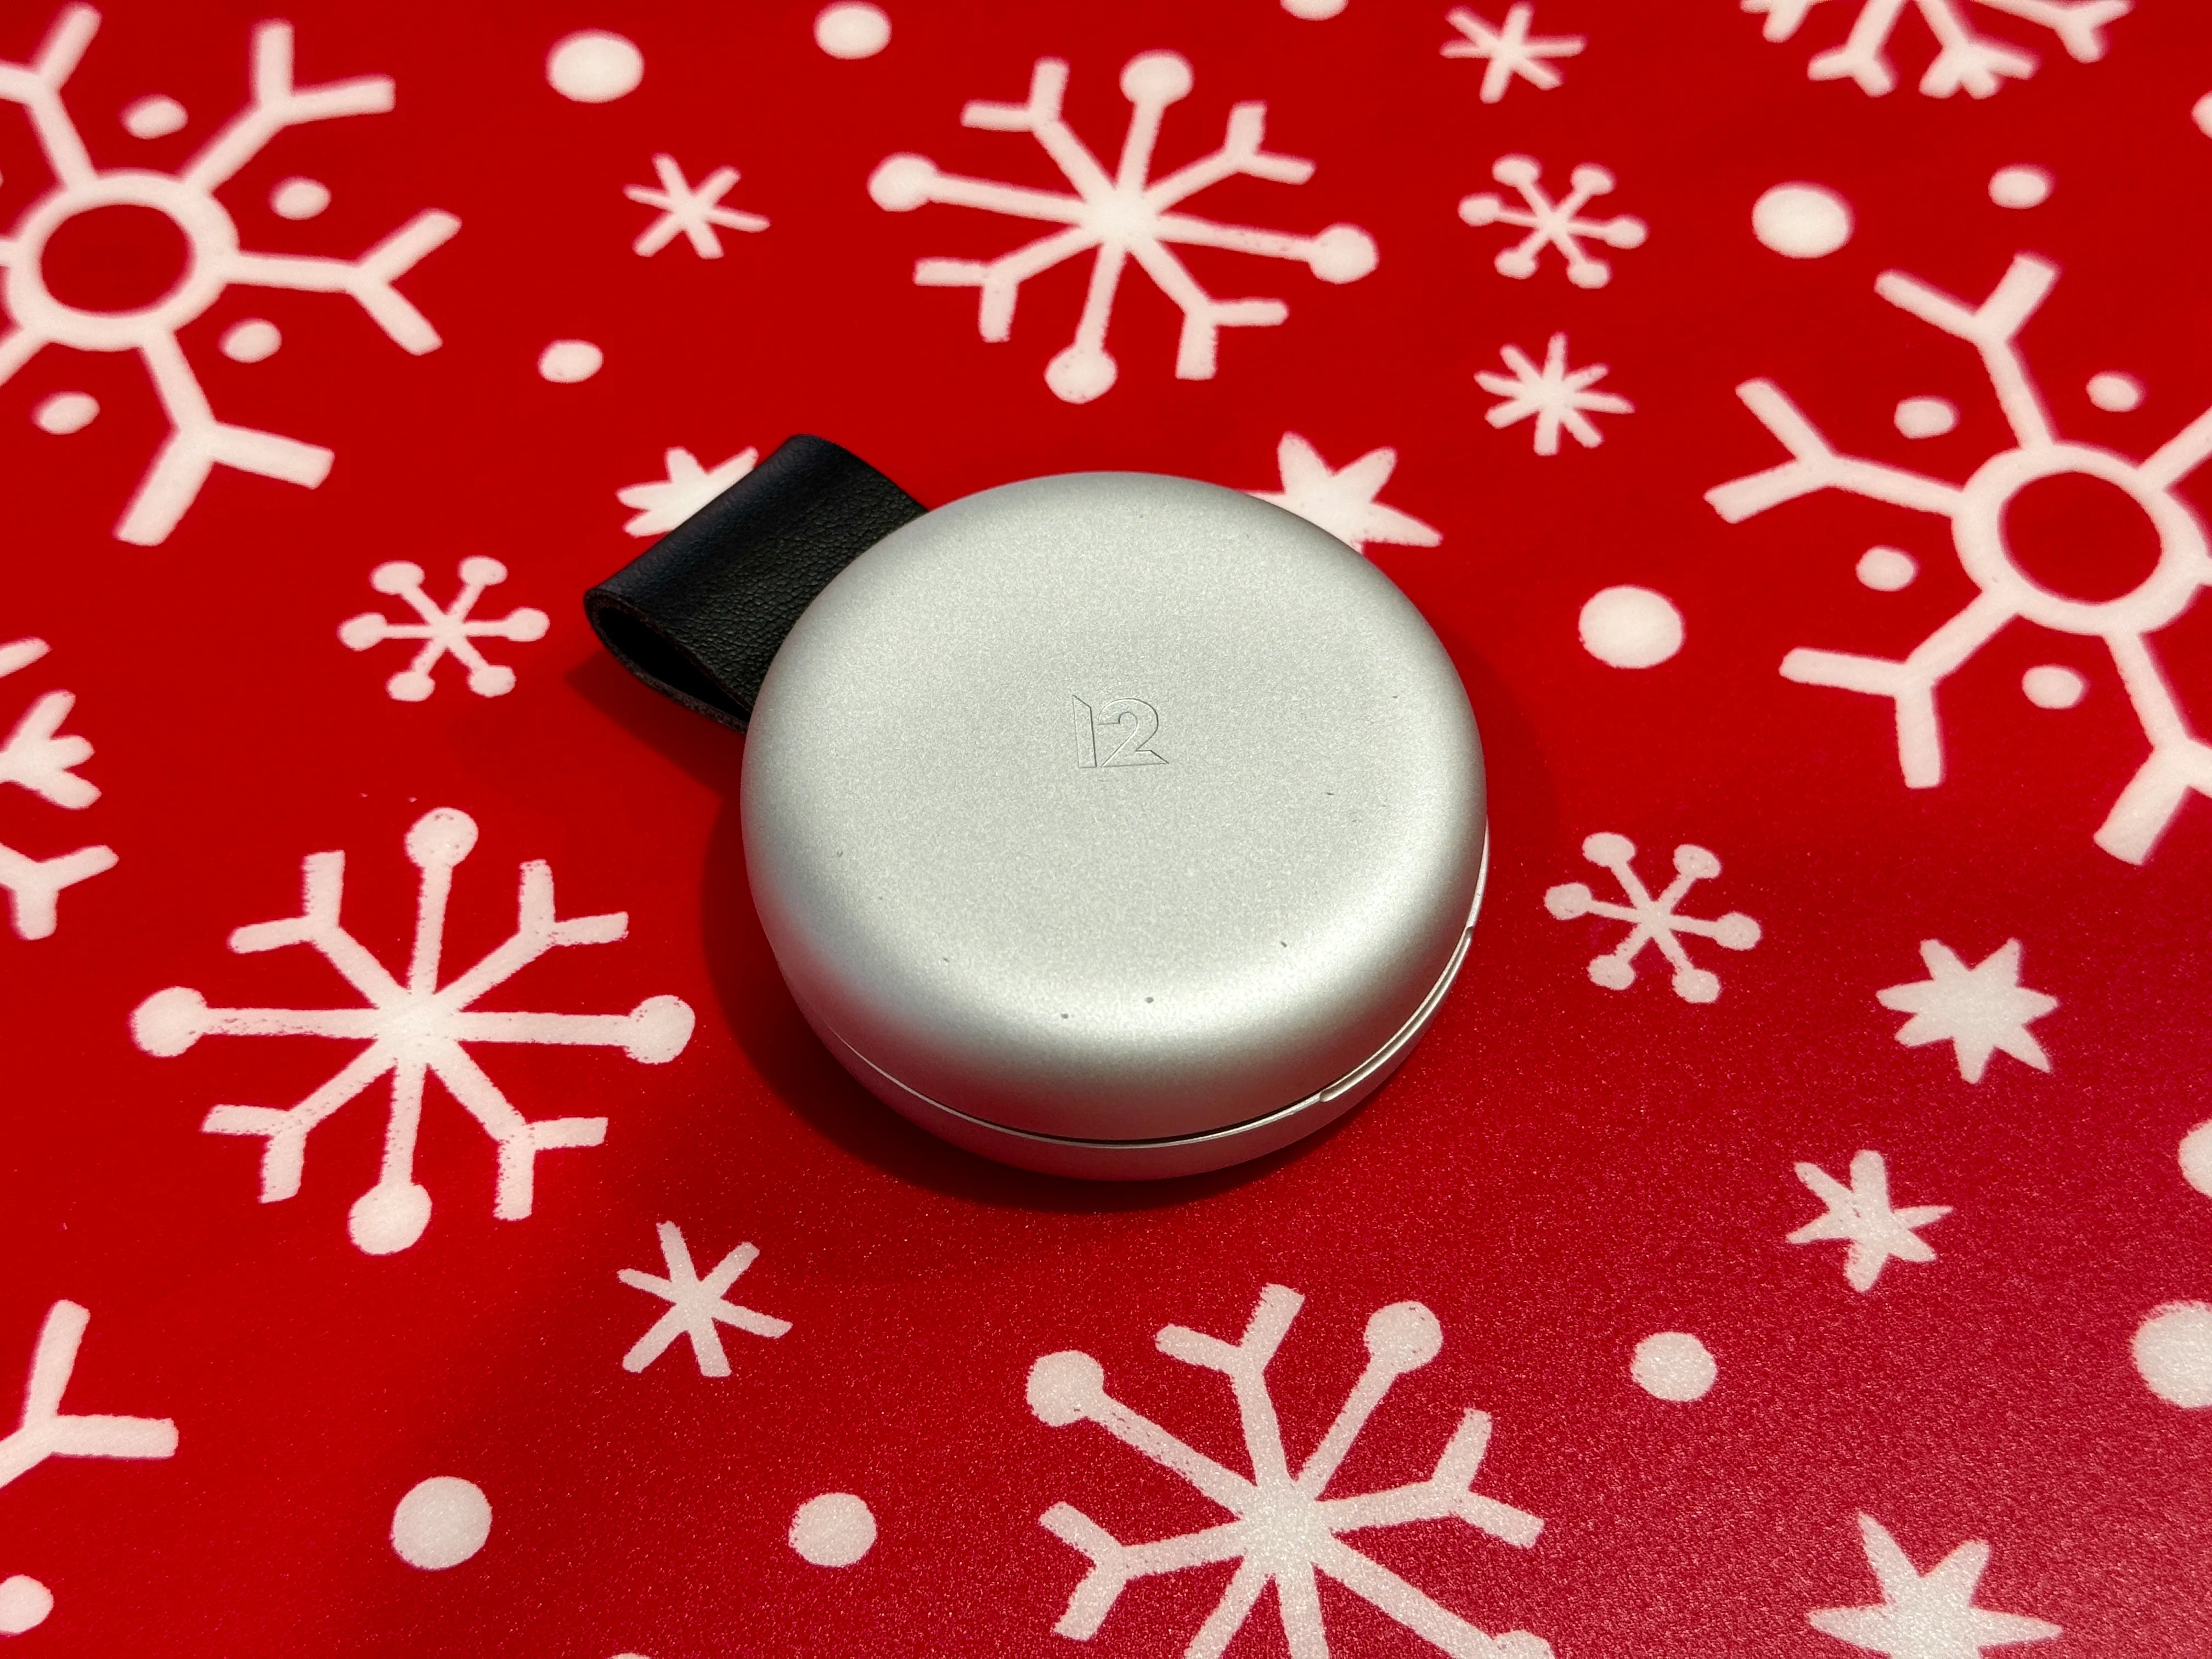 Twelve South ButterFly 2-in-1 MagSafe Charger closed on a festive placement